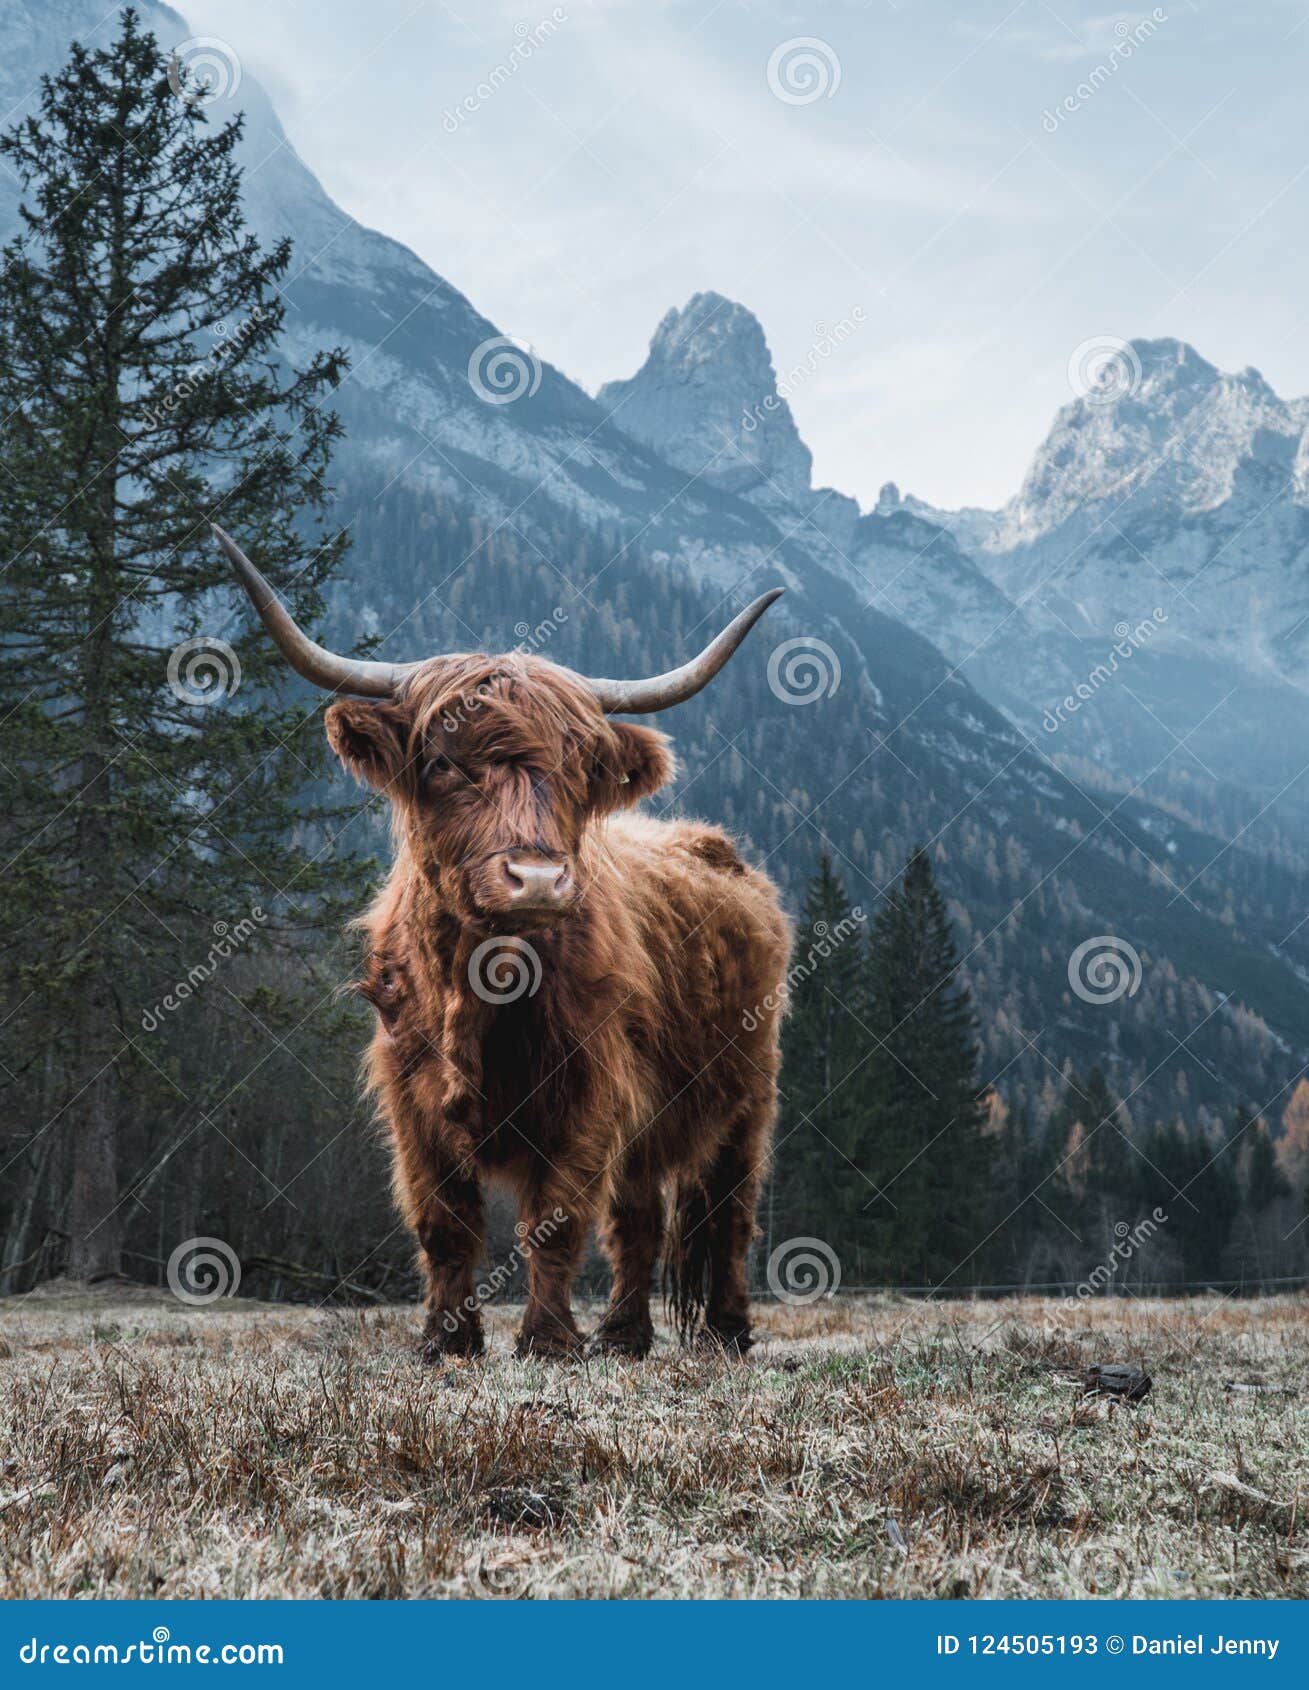 highland cattle in front of huge peaks